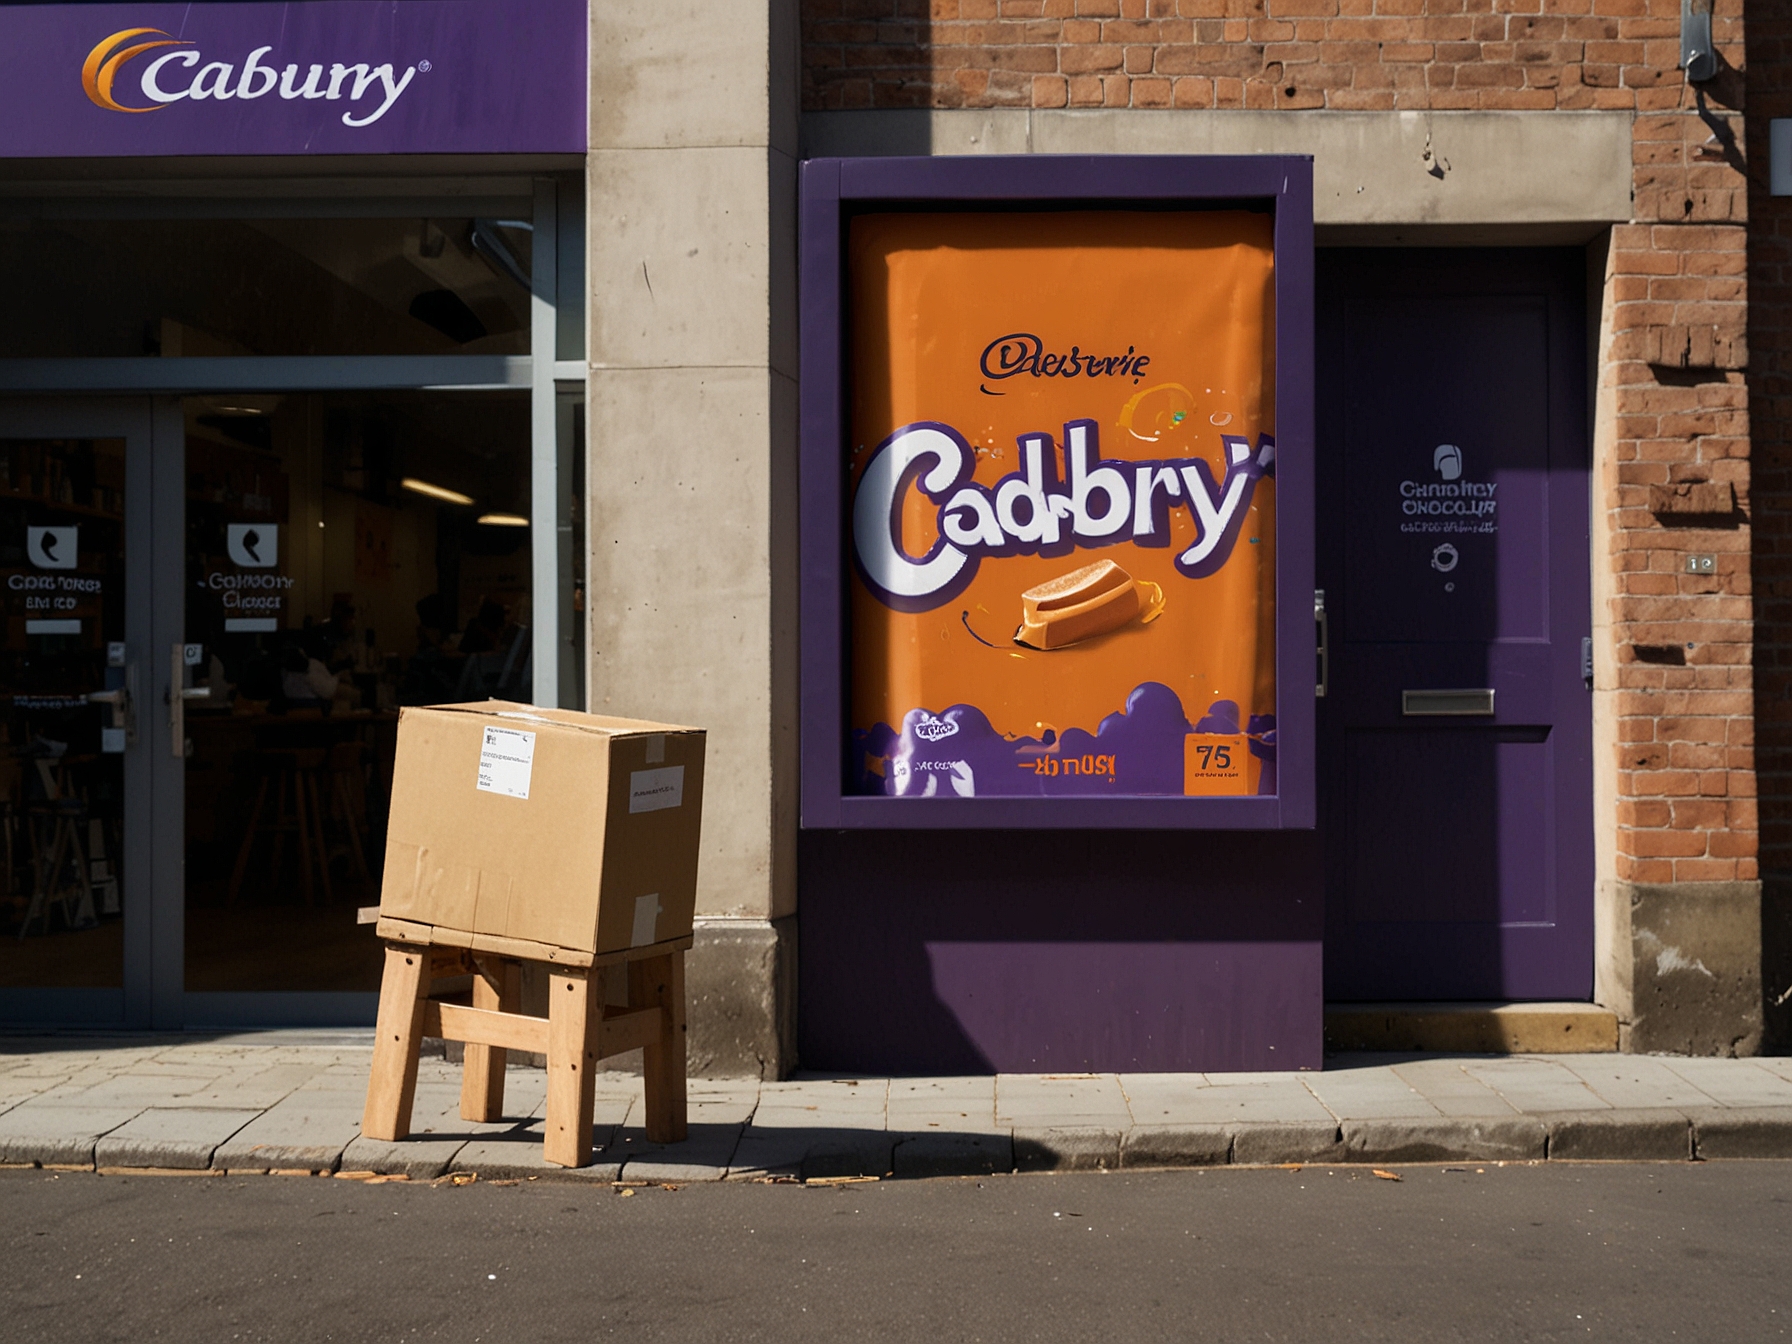 A giant 'dog-sized' Cadbury chocolate bar held by a happy shopper in front of an Amazon delivery box, showcasing the bar's colossal size and the convenience of online shopping.